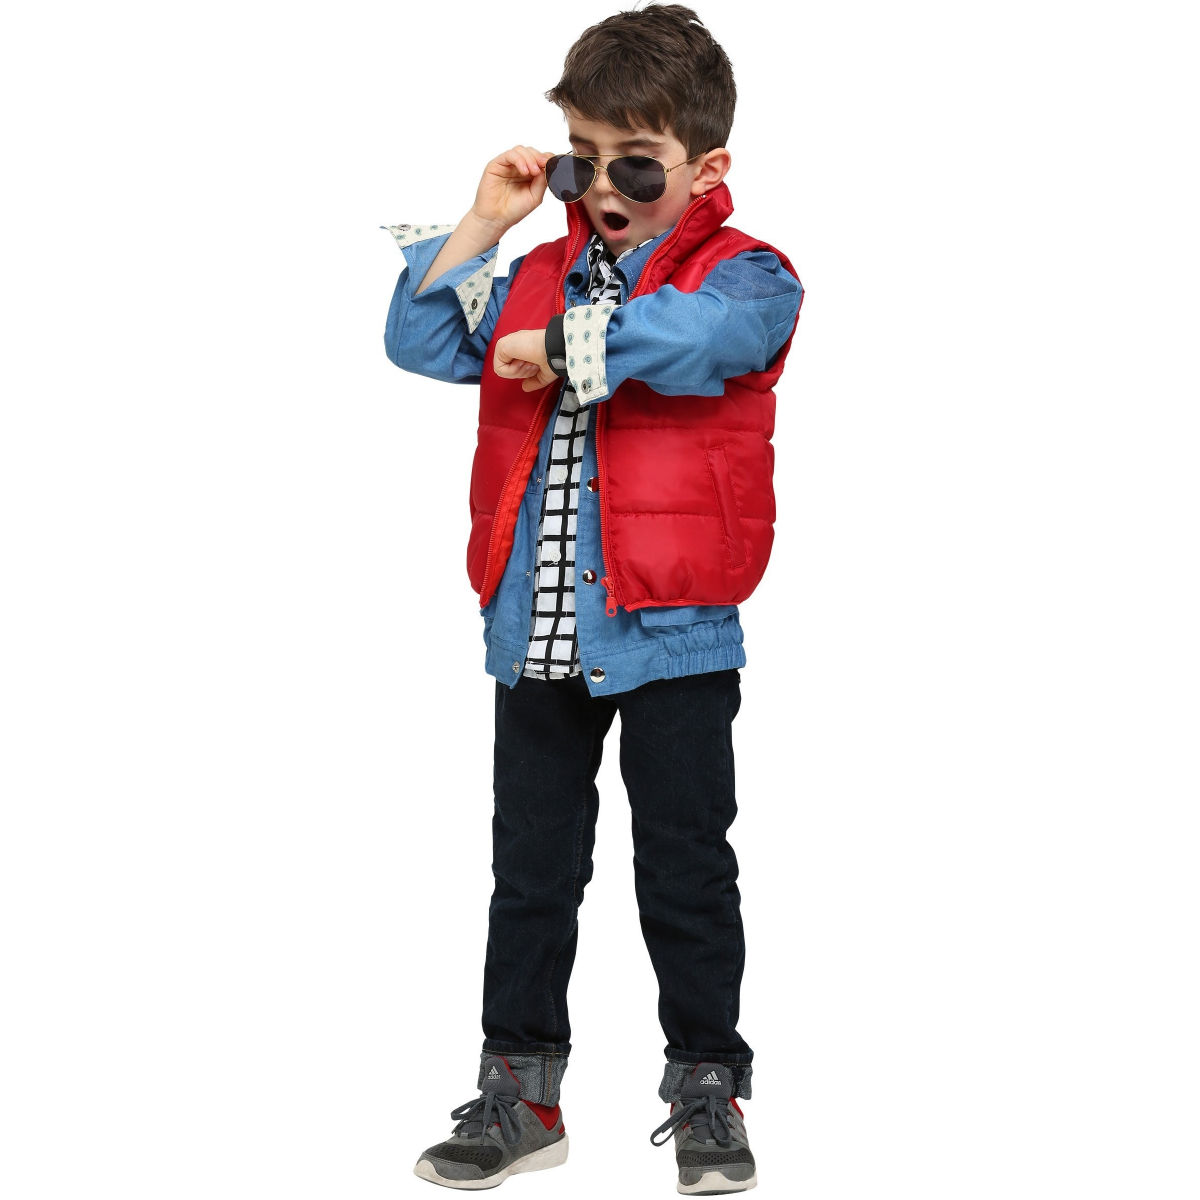 Back to the Future Marty McFly Toddler Costume